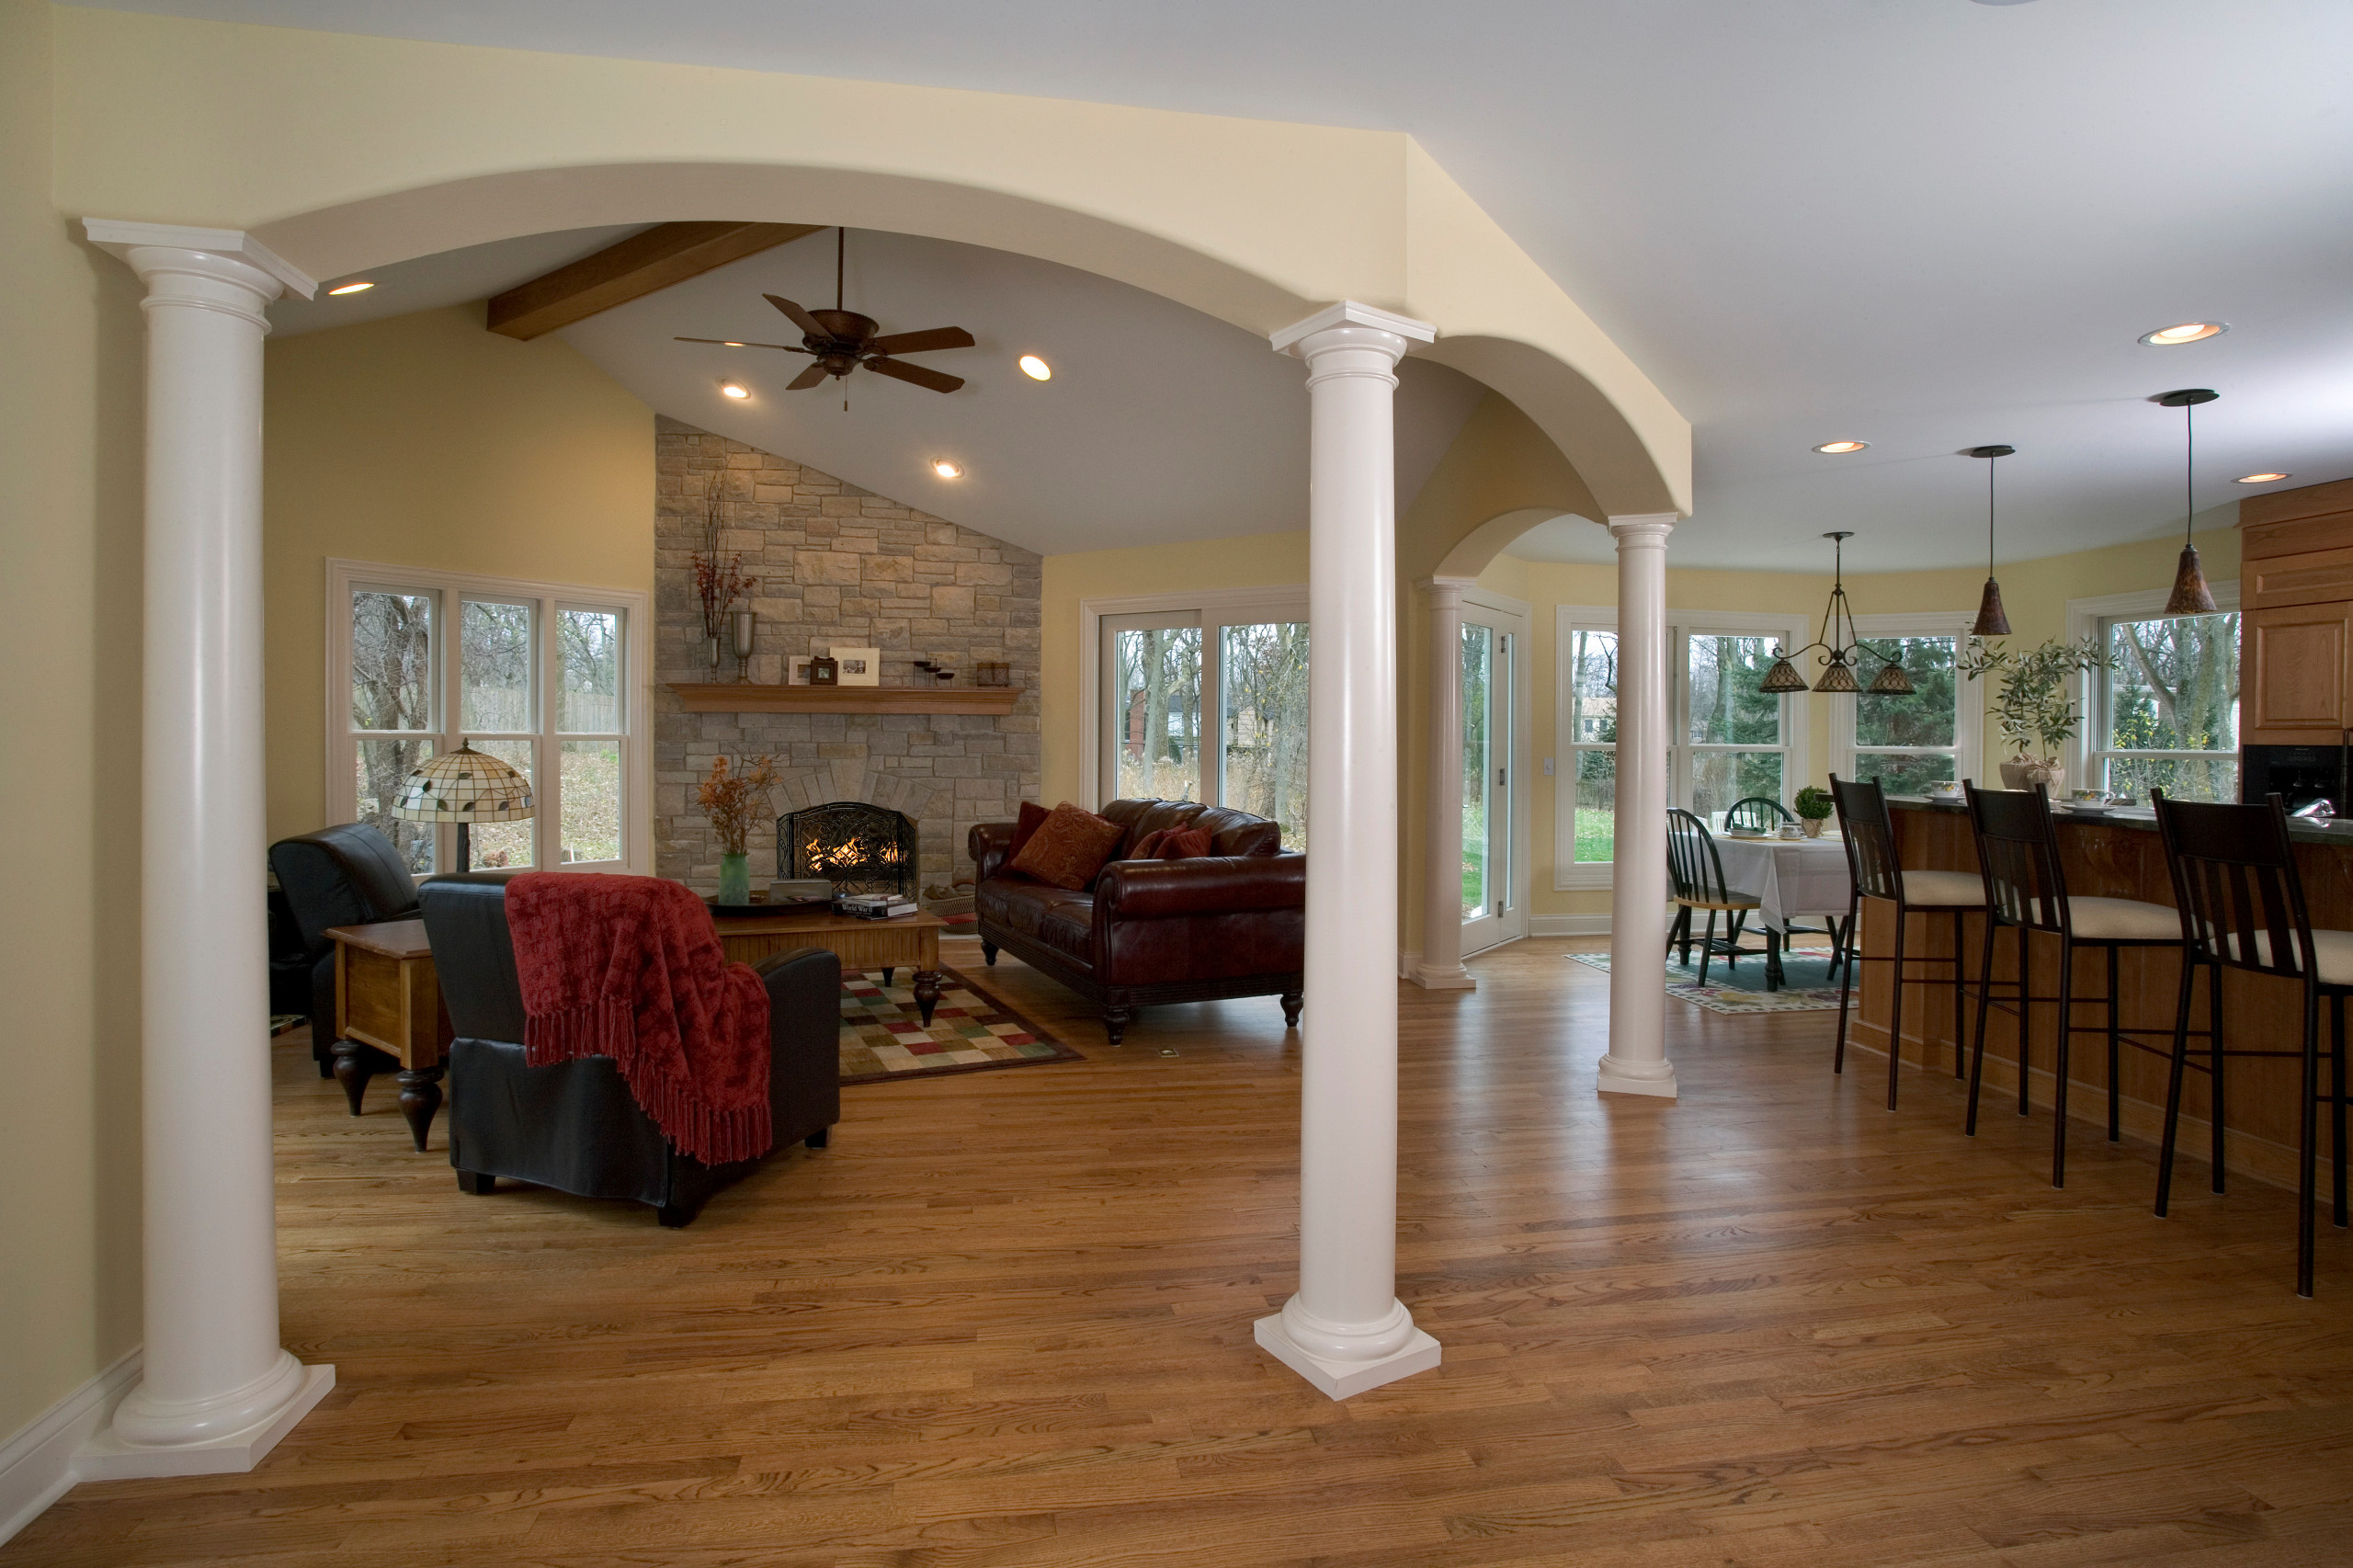 Arched Openings at Family Room